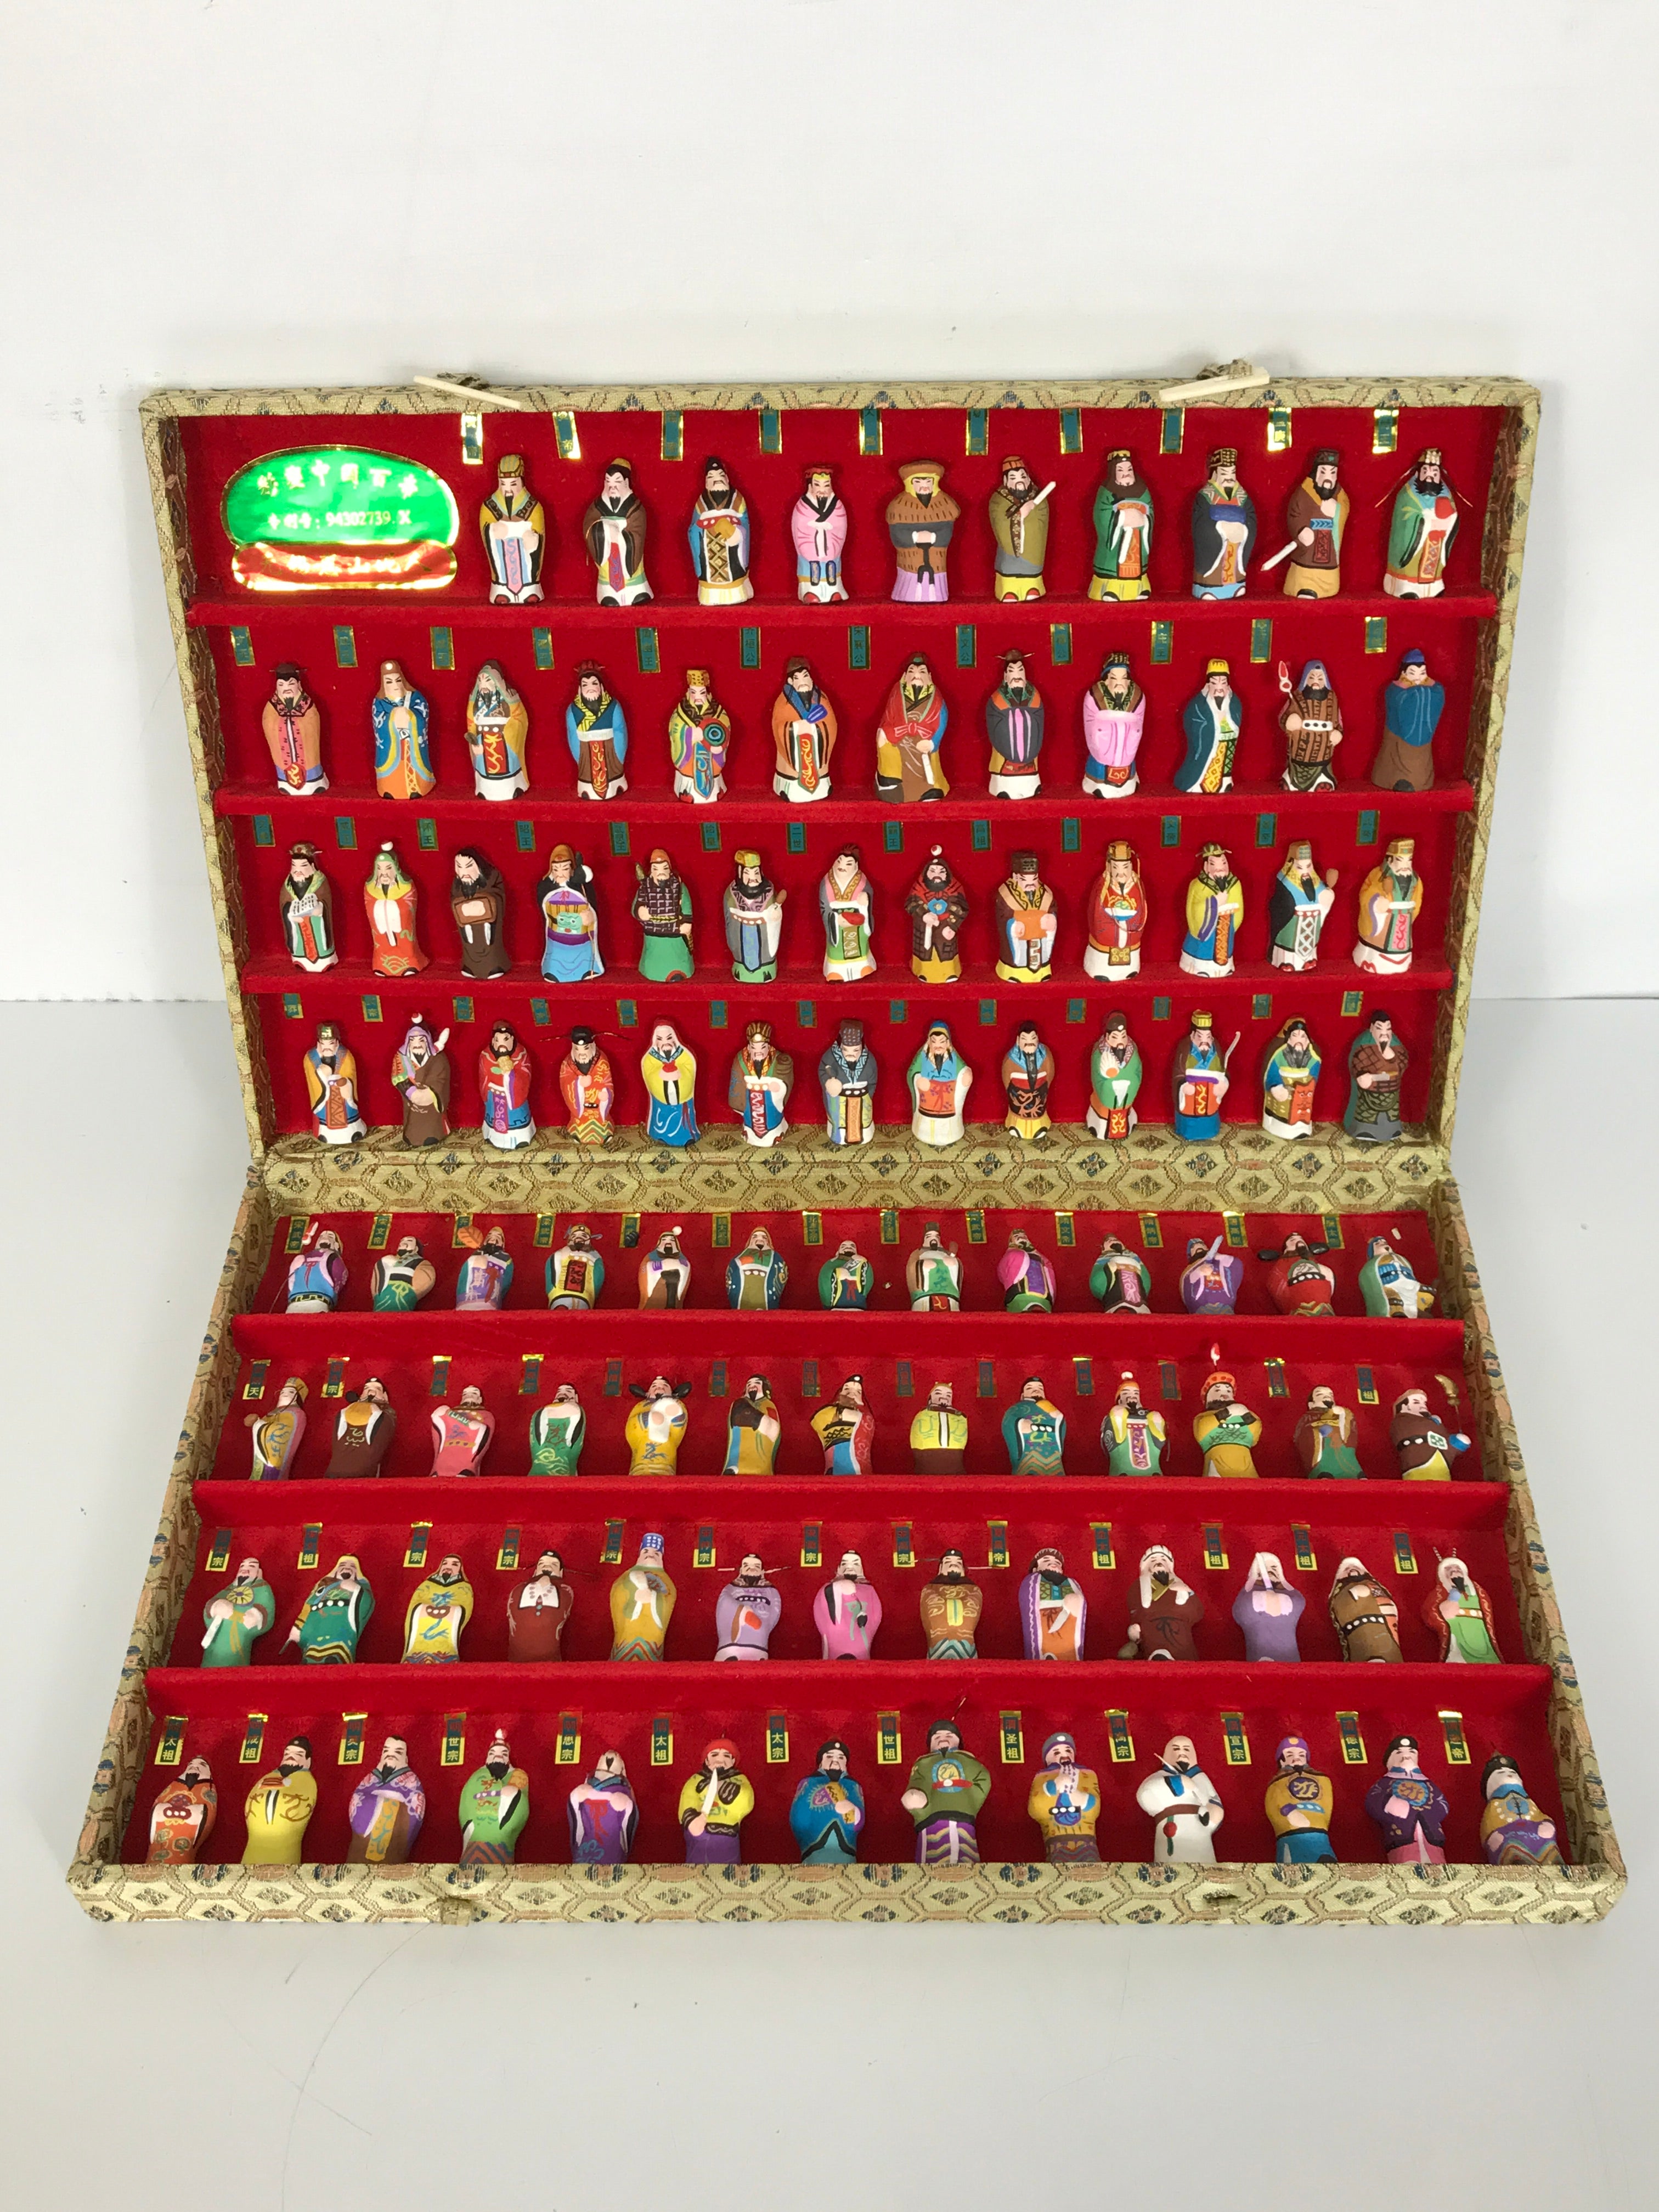 Vintage Boxed Set of 100 Chinese Emperor Figurines